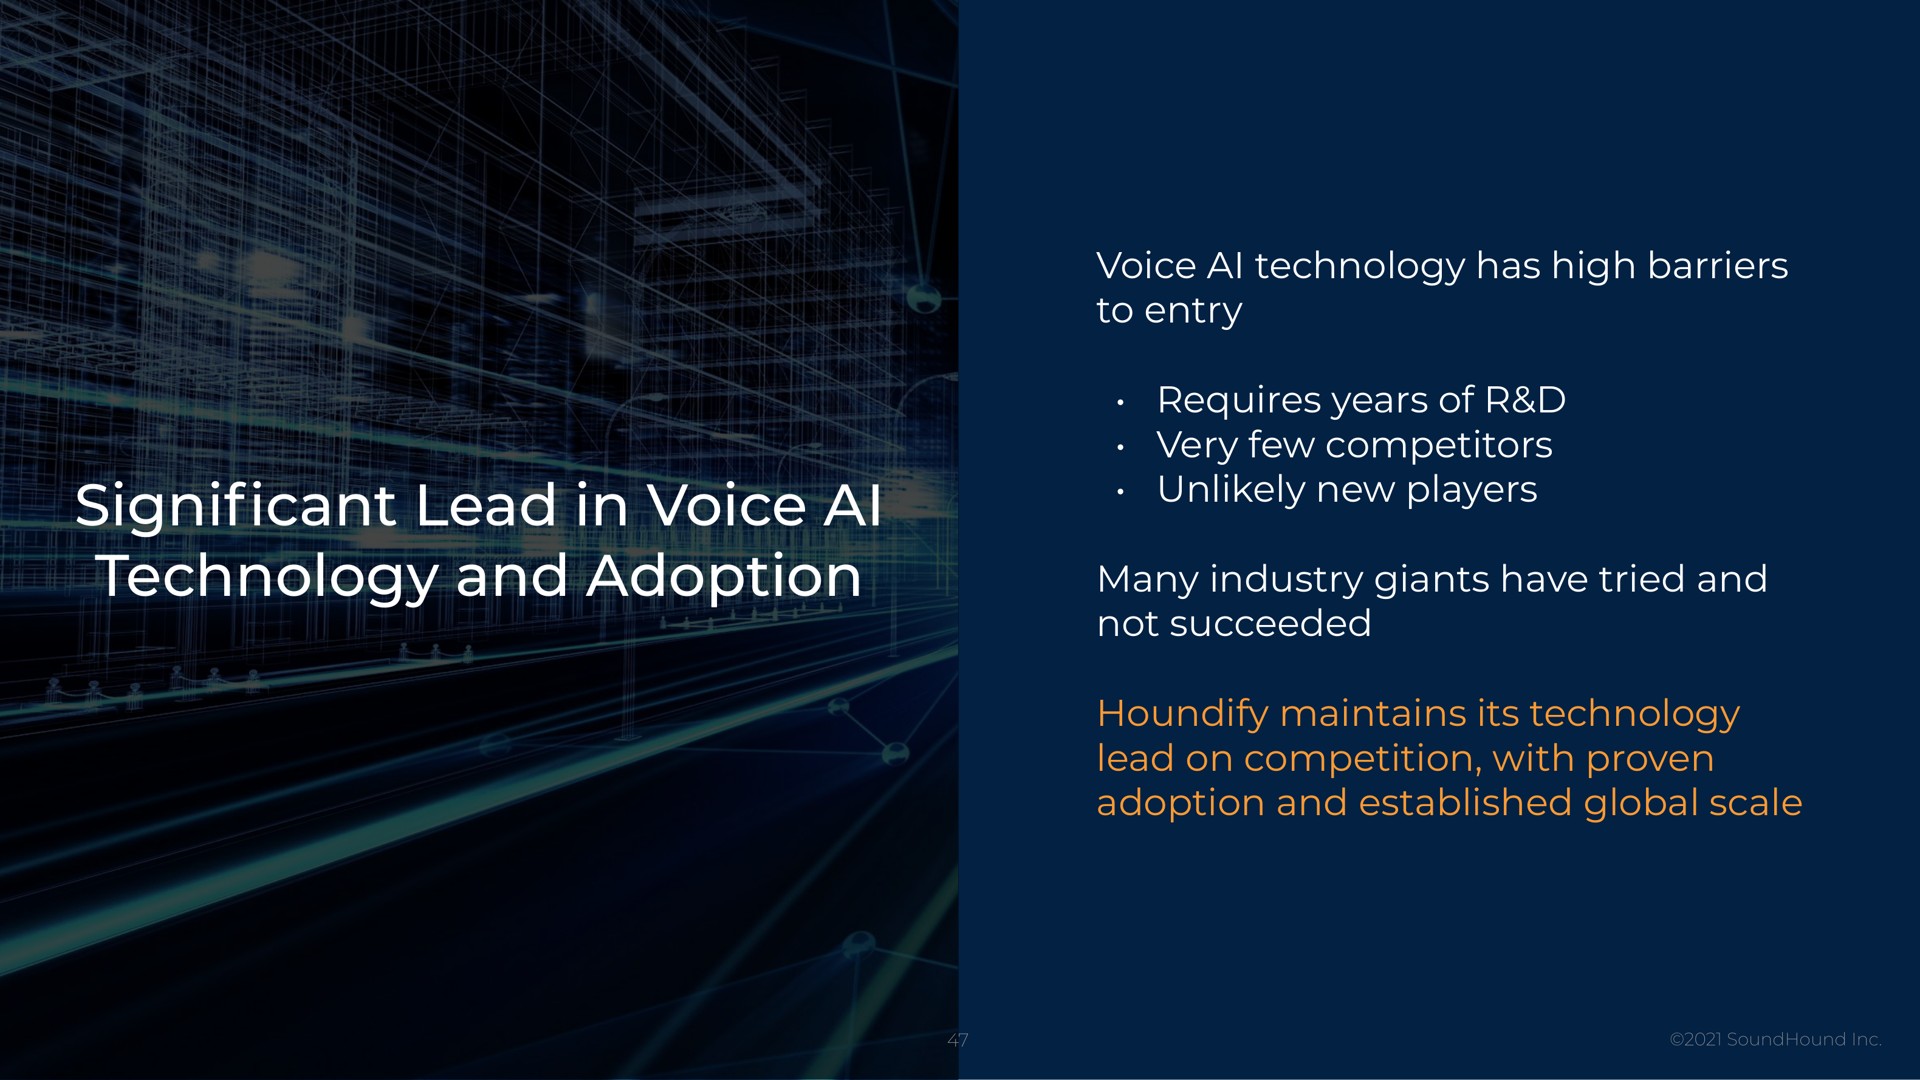 cant lead in voice technology and adoption voice technology has high barriers to entry requires years of very few competitors unlikely new players many industry giants have tried and not succeeded maintains its technology lead on competition with proven adoption and established global scale significant mona a | SoundHound